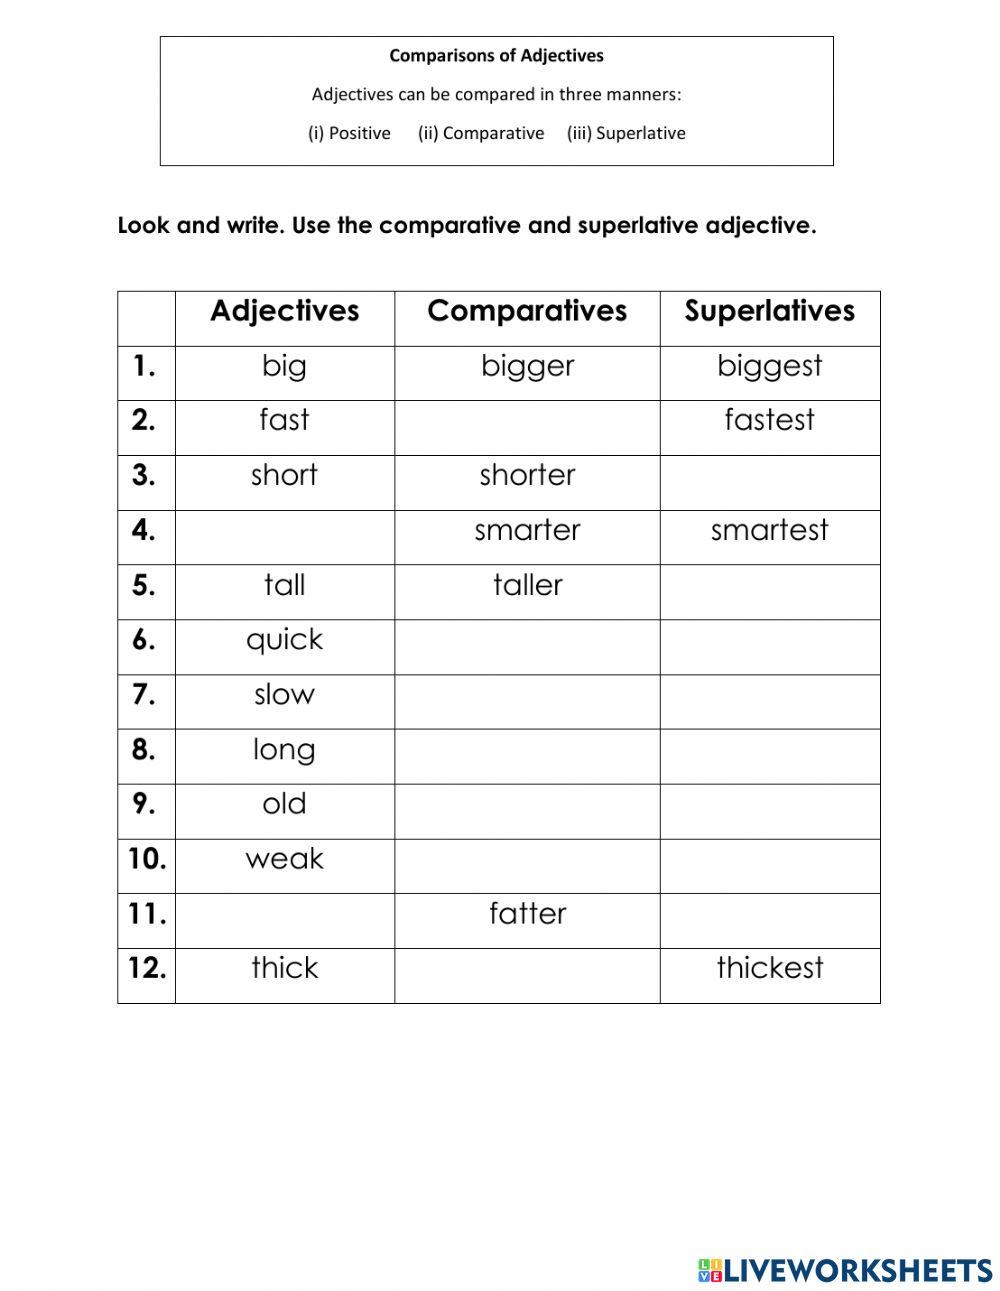 Comparisons of Adjectives